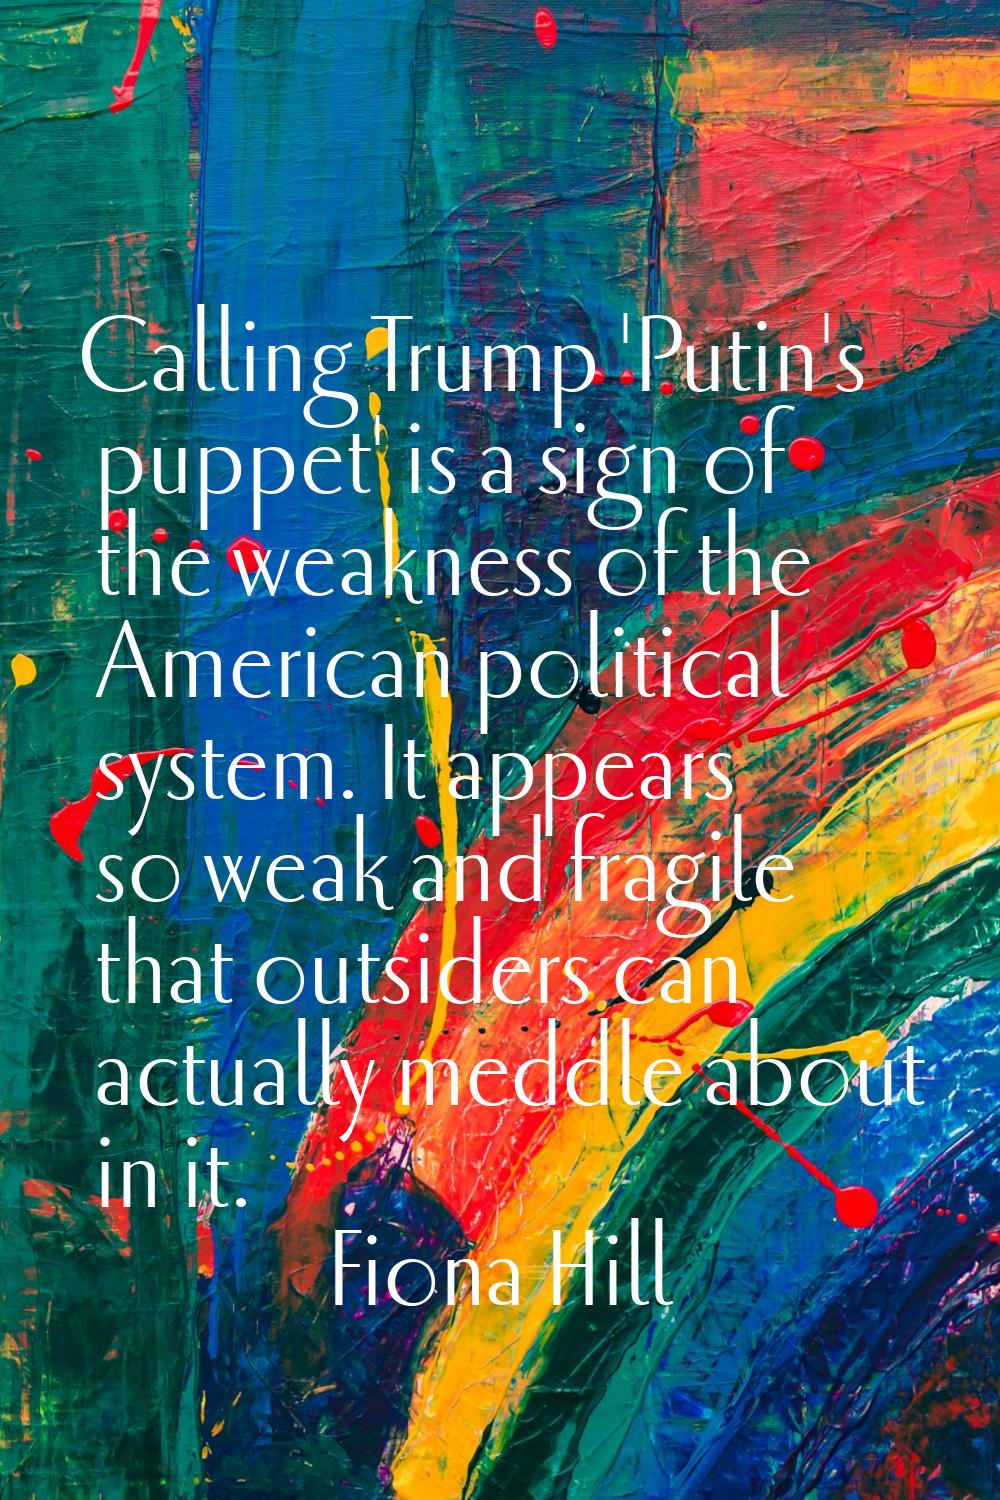 Calling Trump 'Putin's puppet' is a sign of the weakness of the American political system. It appea